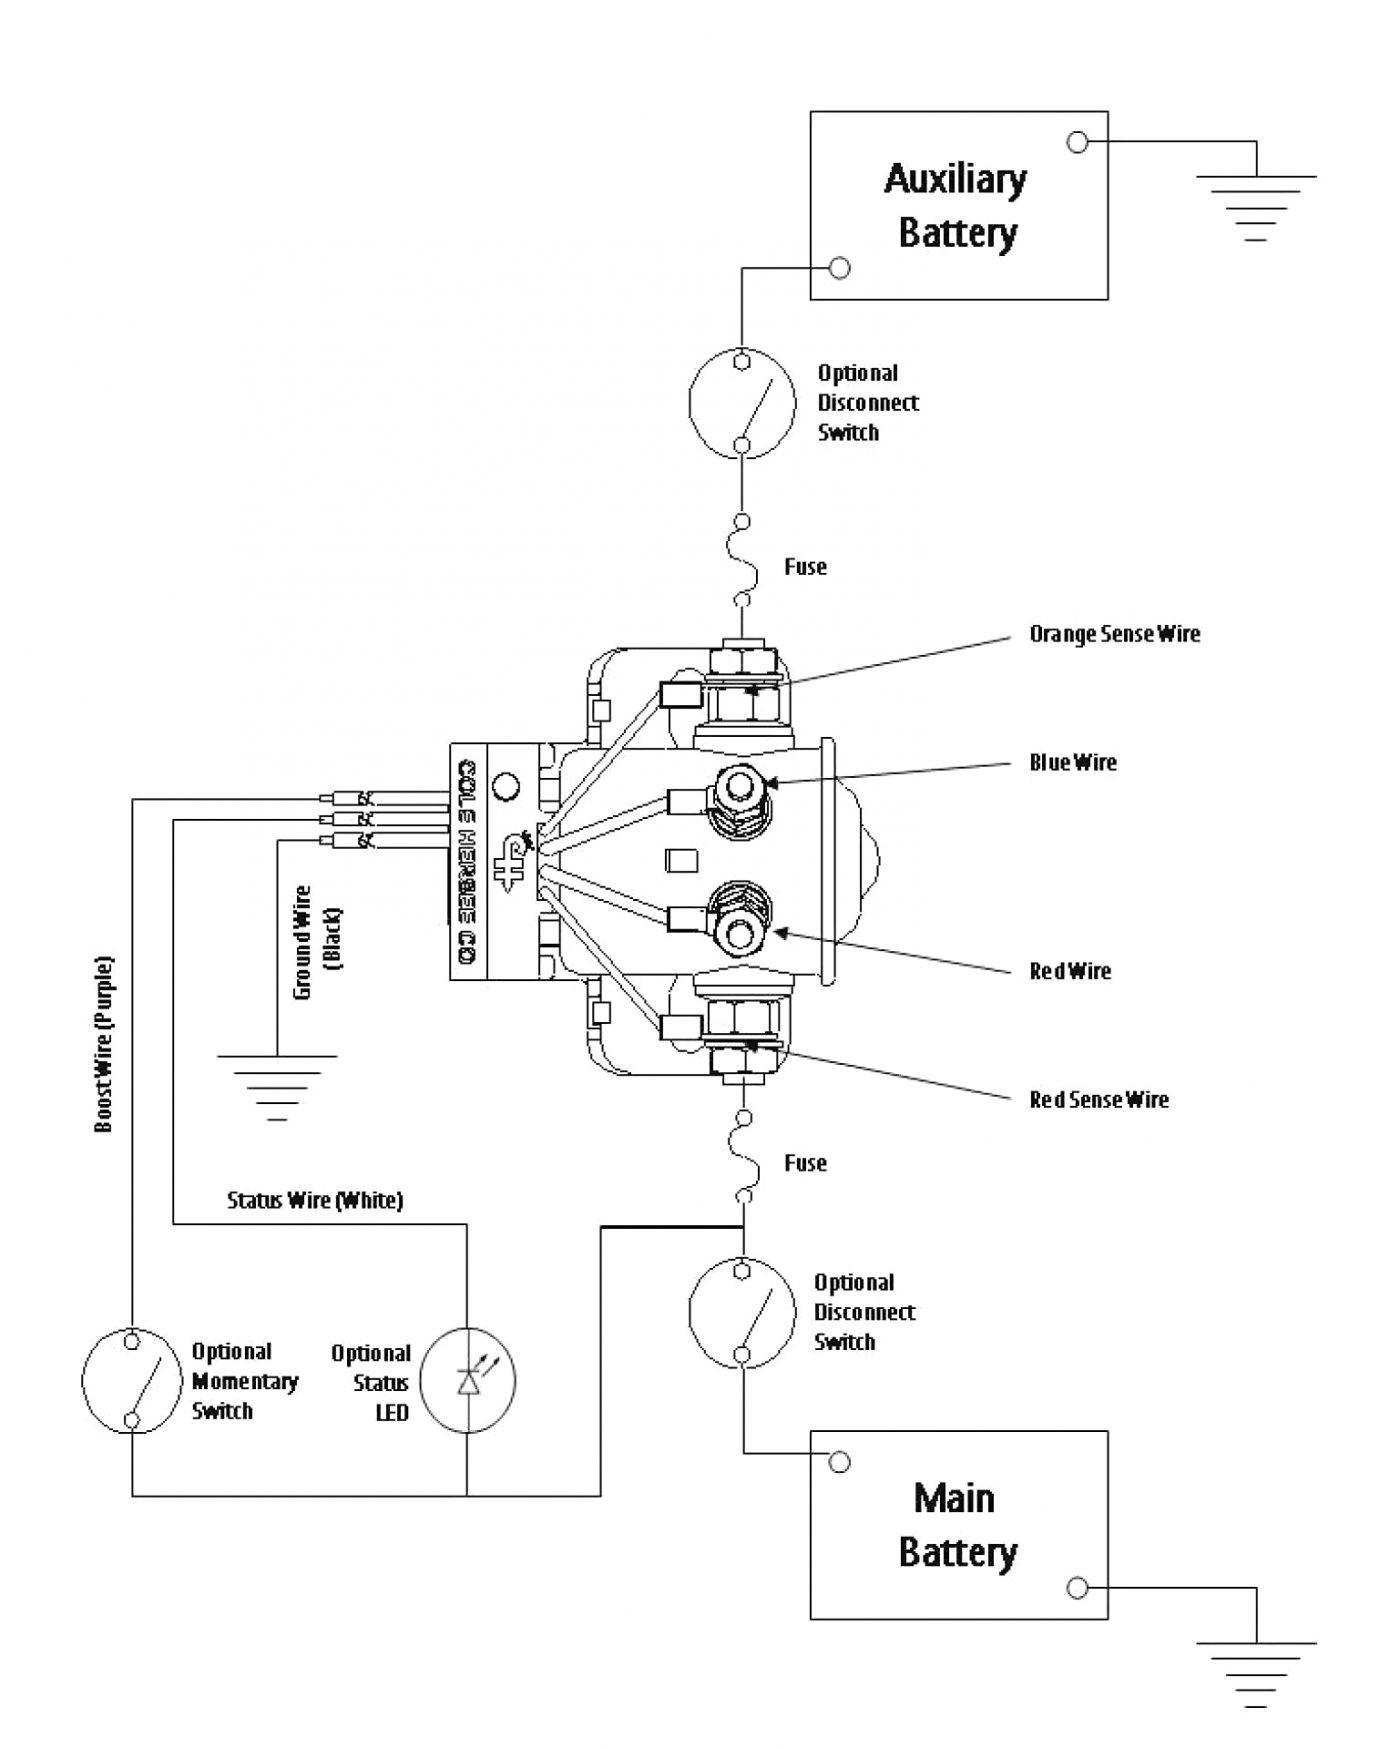 Wiring Diagram for Inverter In Rv Valid Wiring Diagram for Travel Trailer Battery Refrence Dual Battery